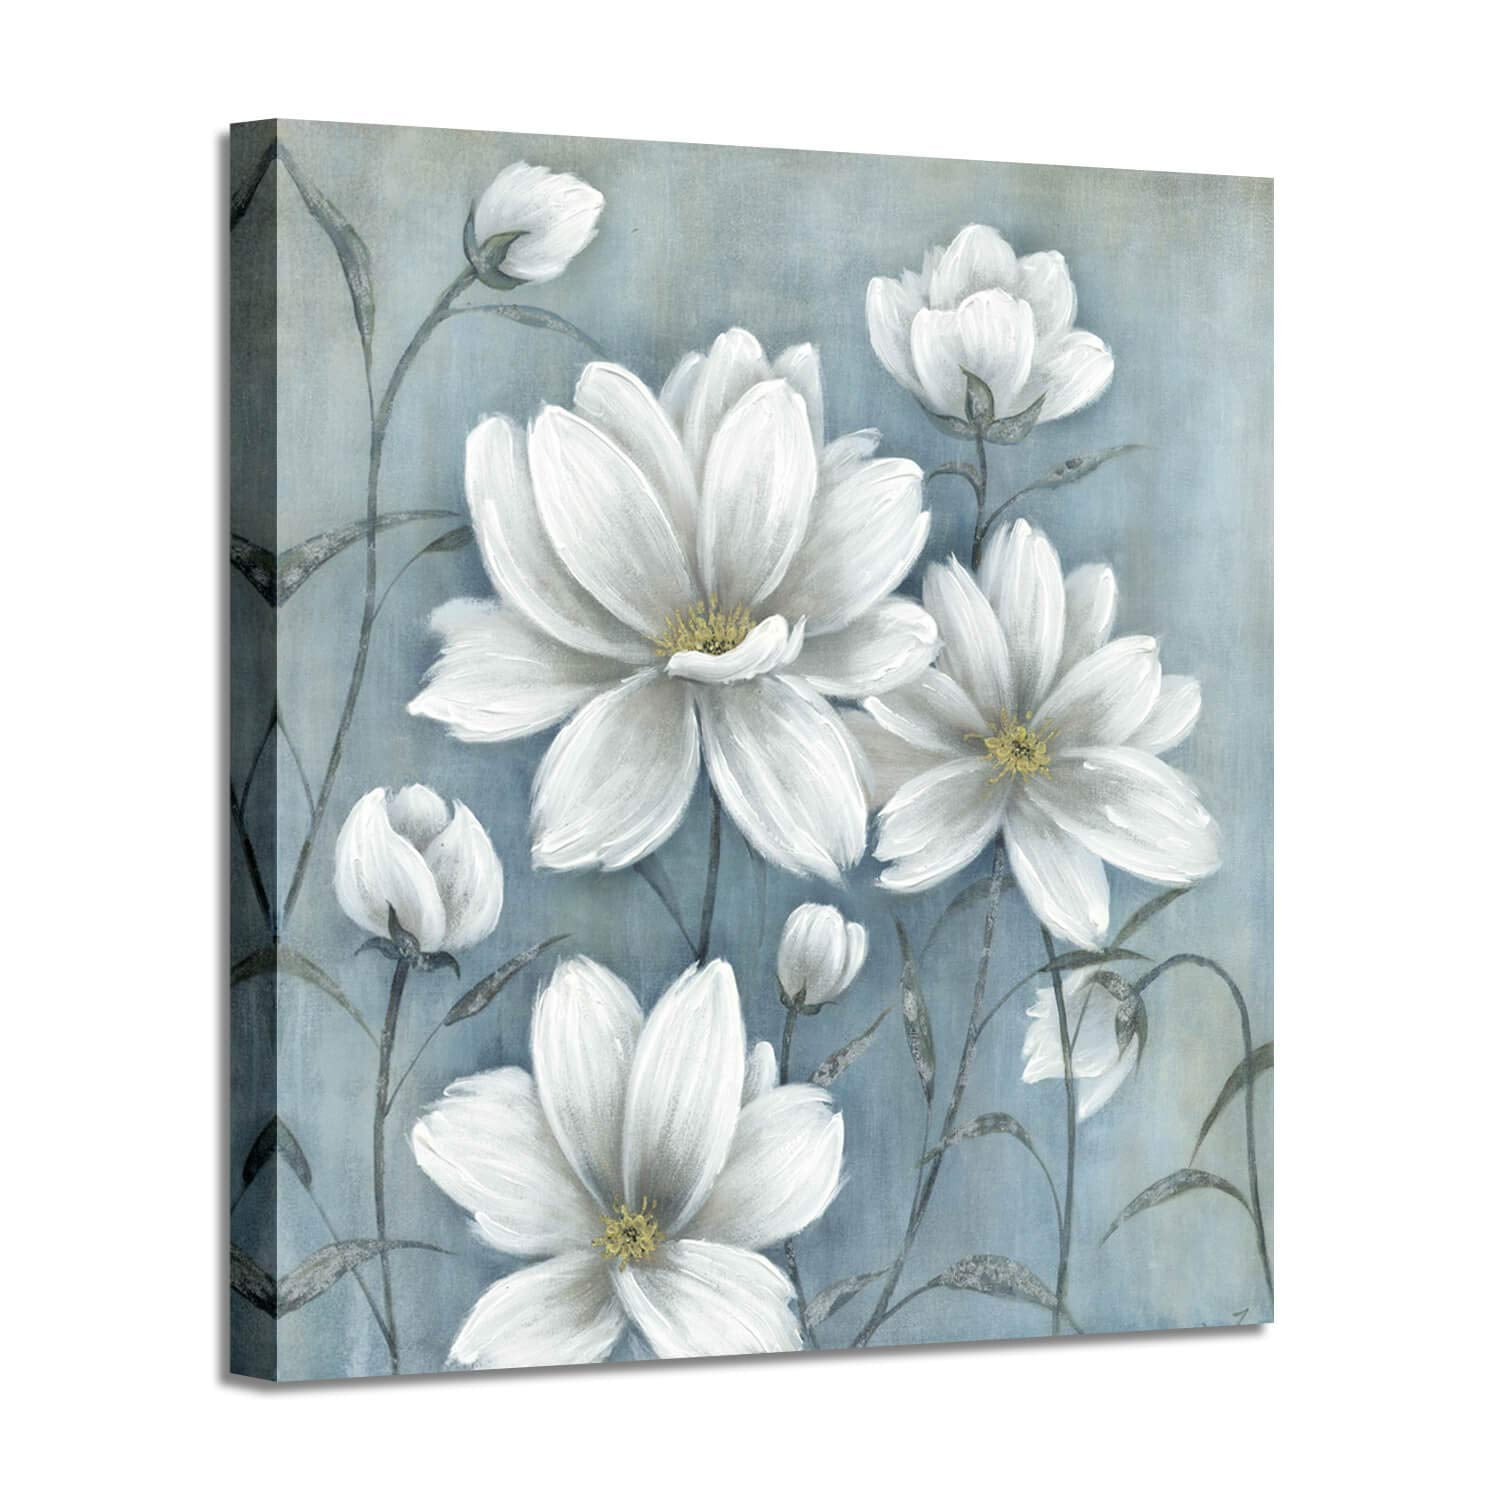 LIVEDITOR White Floral Artwork Print on Blue Canvas Wall Art, Magnolia  Flowers Canvas Picture Painting for Living Room (20